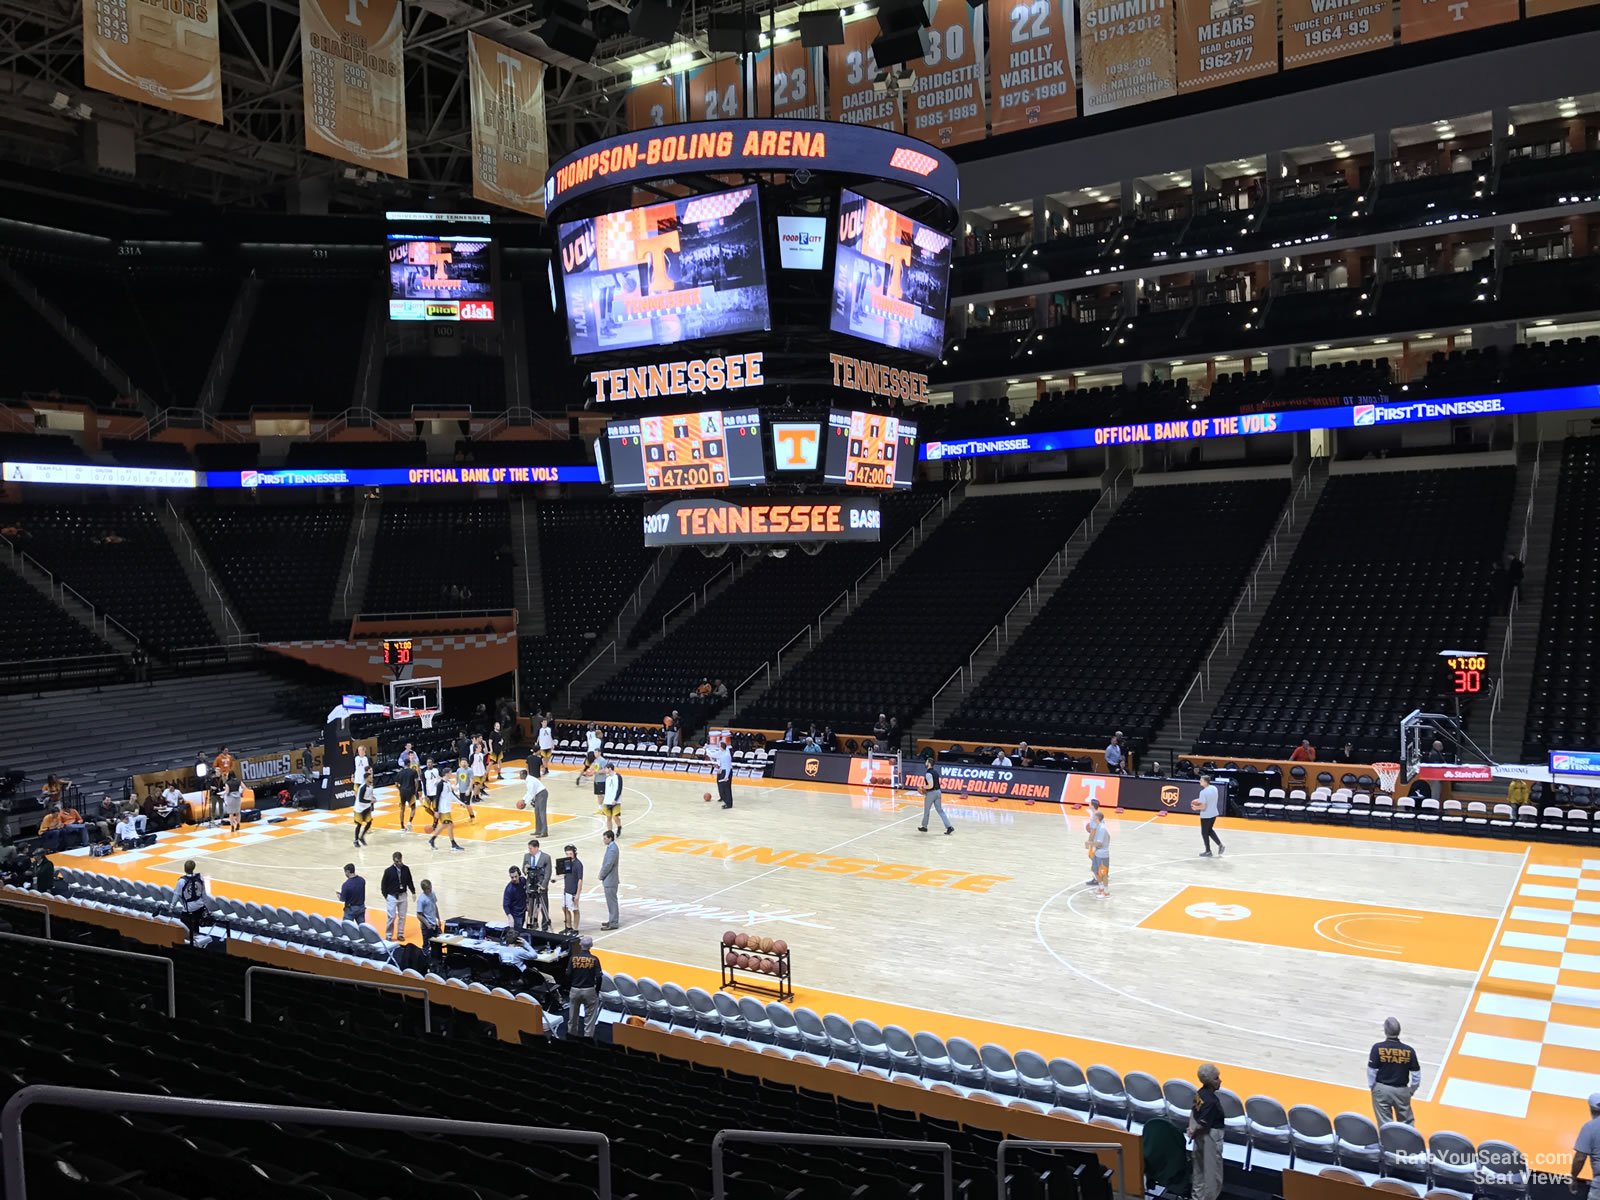 section 119, row 17 seat view  - thompson-boling arena